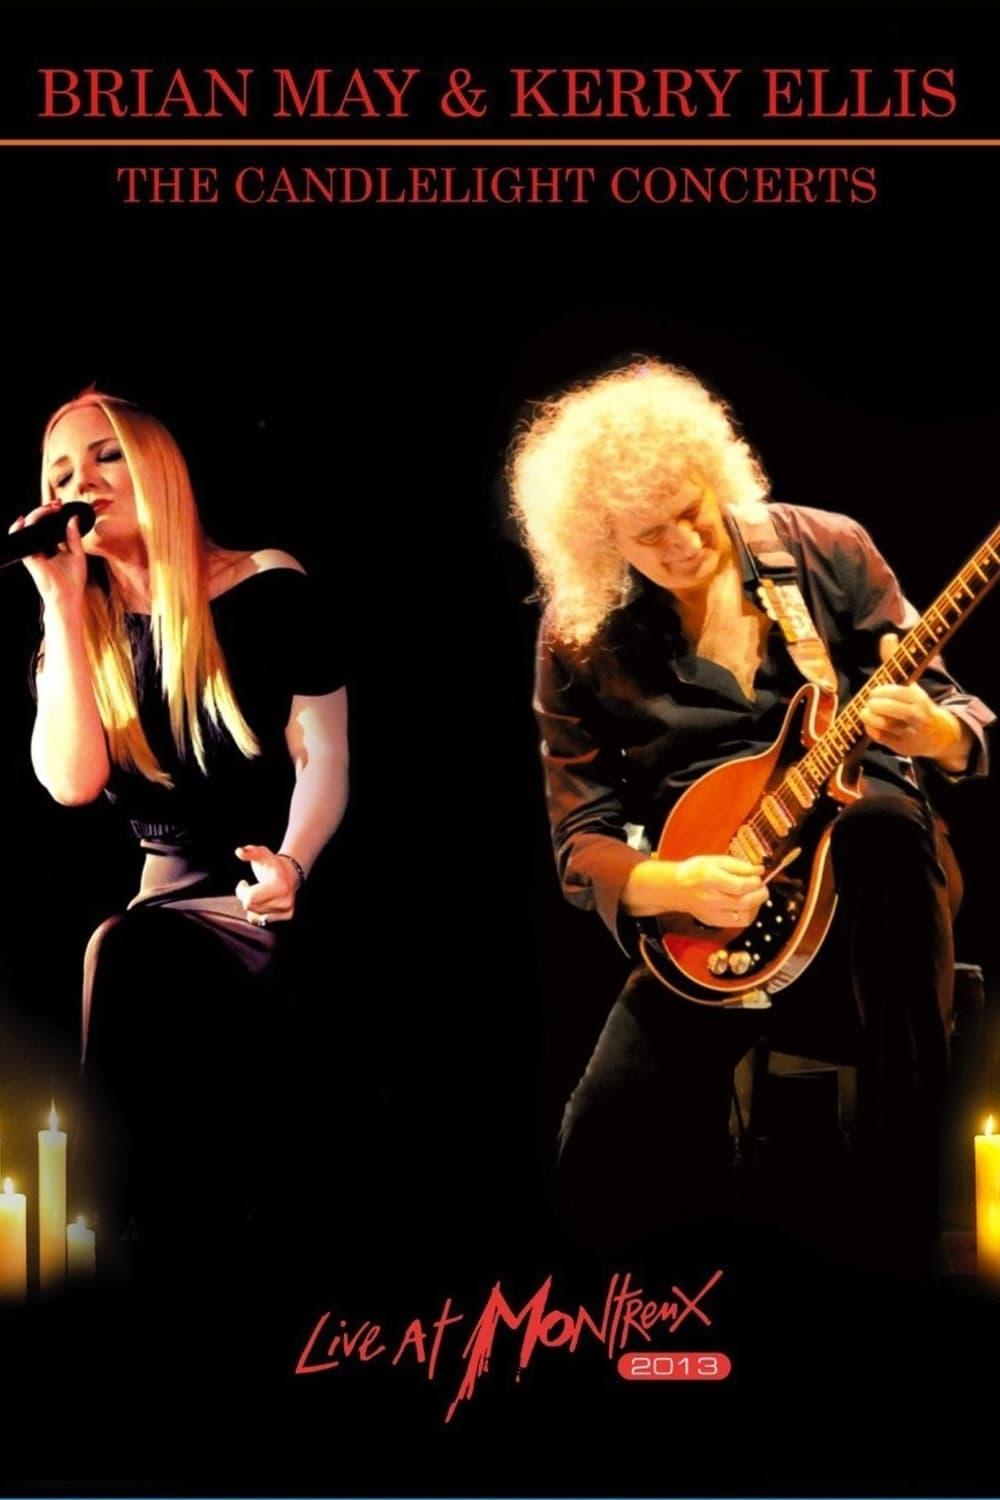 Brian May & Kerry Ellis - The Candlelight Concerts Live at Montreux poster